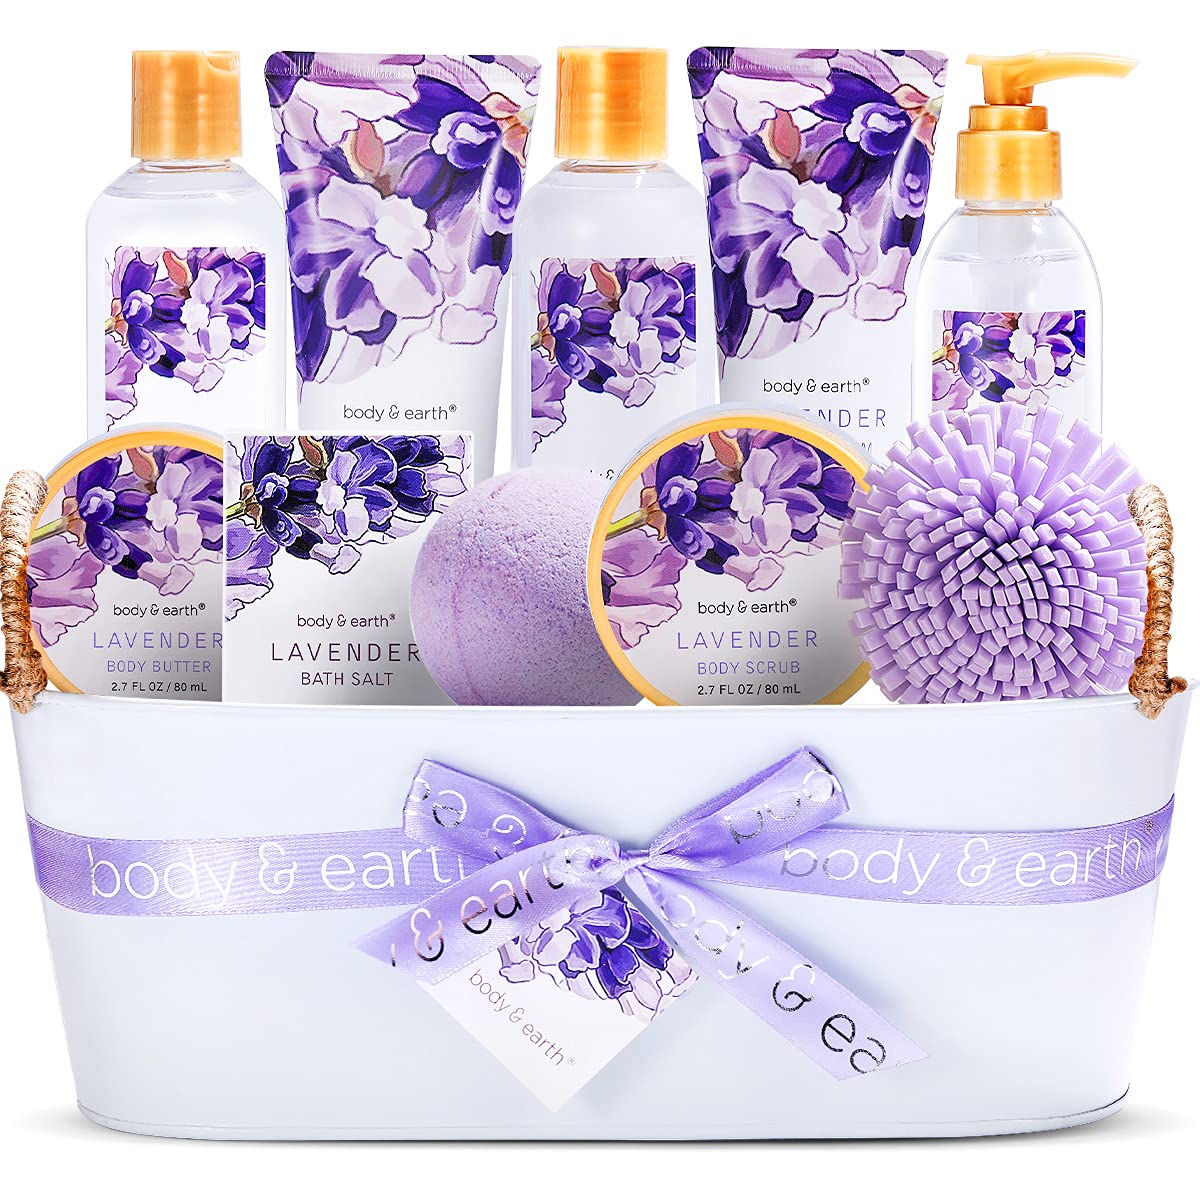 Spa Bath Gift Sets for Women, 11 Pcs Lavender Gift Baskets, Birthday Holiday Bath and Body Sets Beauty Gifts - image 1 of 10